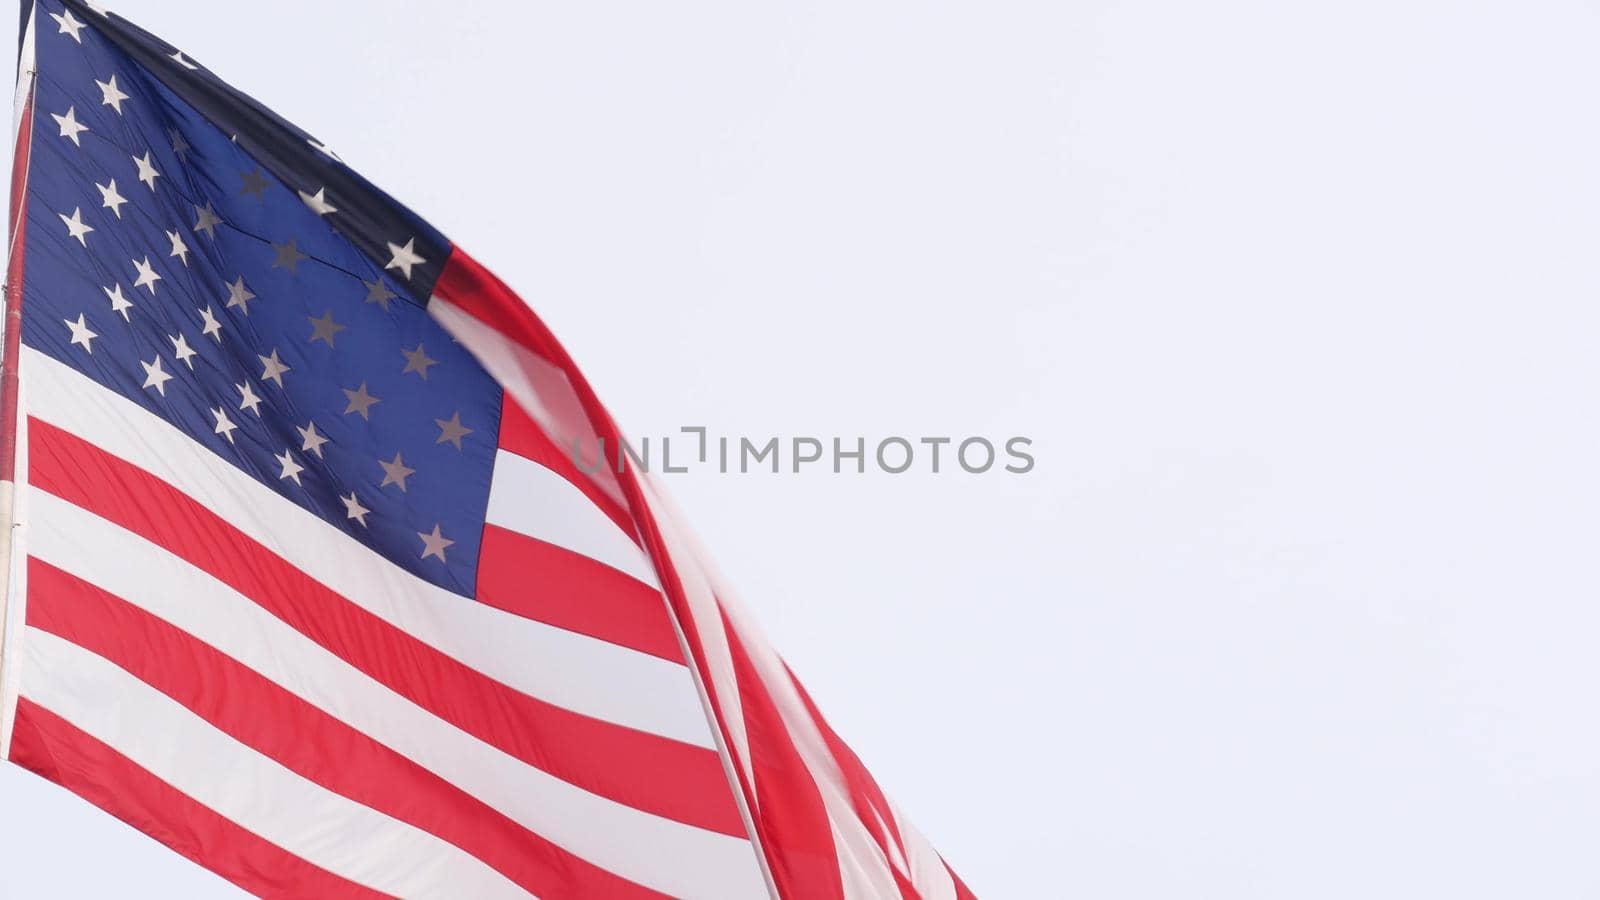 American flag waving in wind, USA. National symbol waves in breeze on flagpole. Real Old Glory Star Spangled Banner as concept of independence, liberty, democracy, patriotism. Background for 4th July.